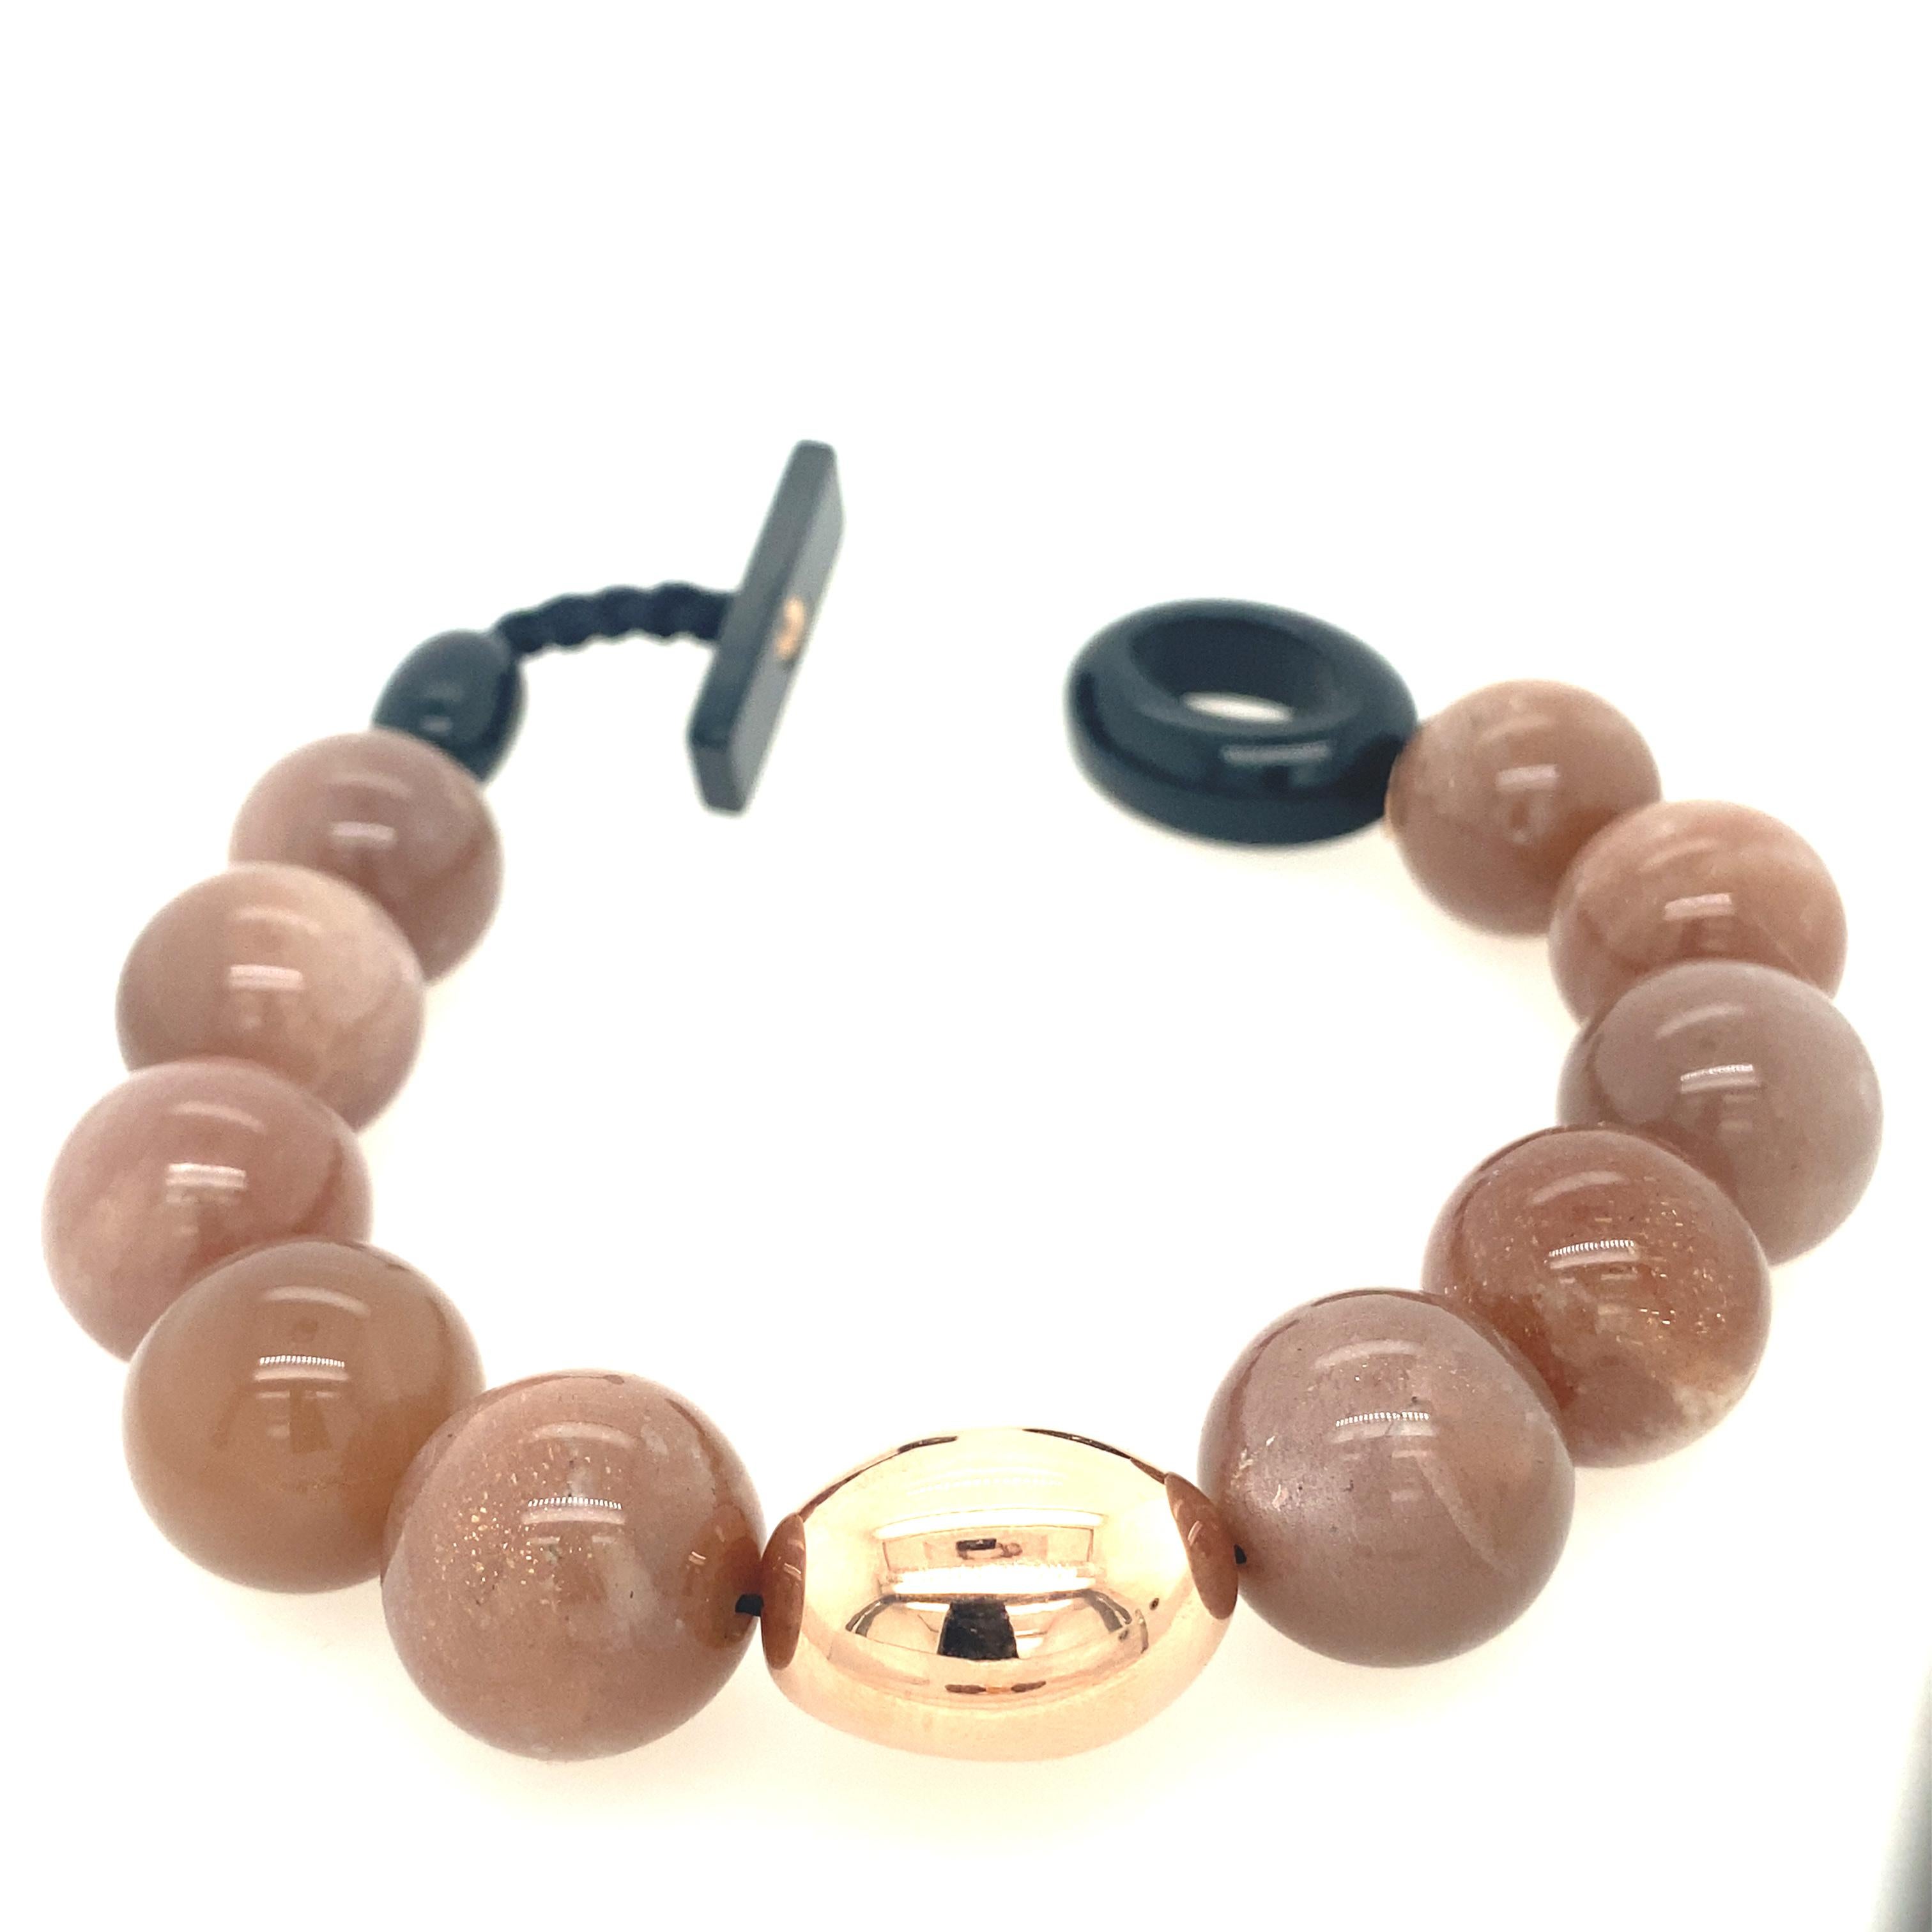 Beaded Bracelet with Peach Moonstone, Gold and Bakelite.
French Collection by Mesure et Art du Temps.

French beaded bracelet accompanied by a peach moonstone, which measures 1cm. The bracelet closes easily, the material of the closure is bakelite.